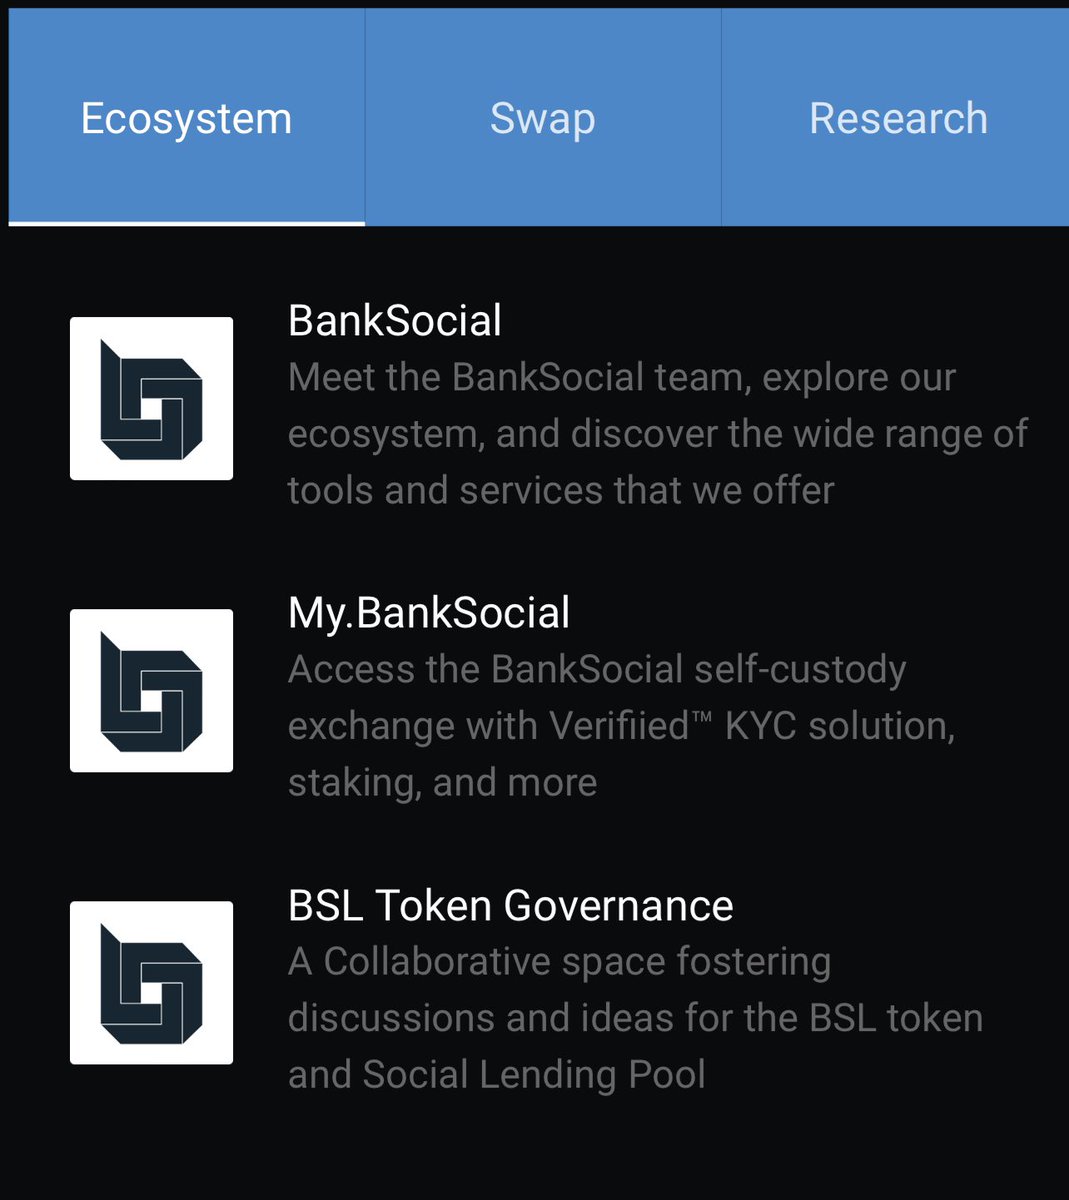 The @BANKSOCIALio wallet update is currently available on IOS 👀. 
-nfts
-swap capabilities 
-ecosystem access directly from the wallet 
-Etherscan, BSCscan, BTCscan, Dragonglass and Dextools all accessible within the Research tab. 🔥

Lfg!

#banksocial $bsl #hedera $hbar